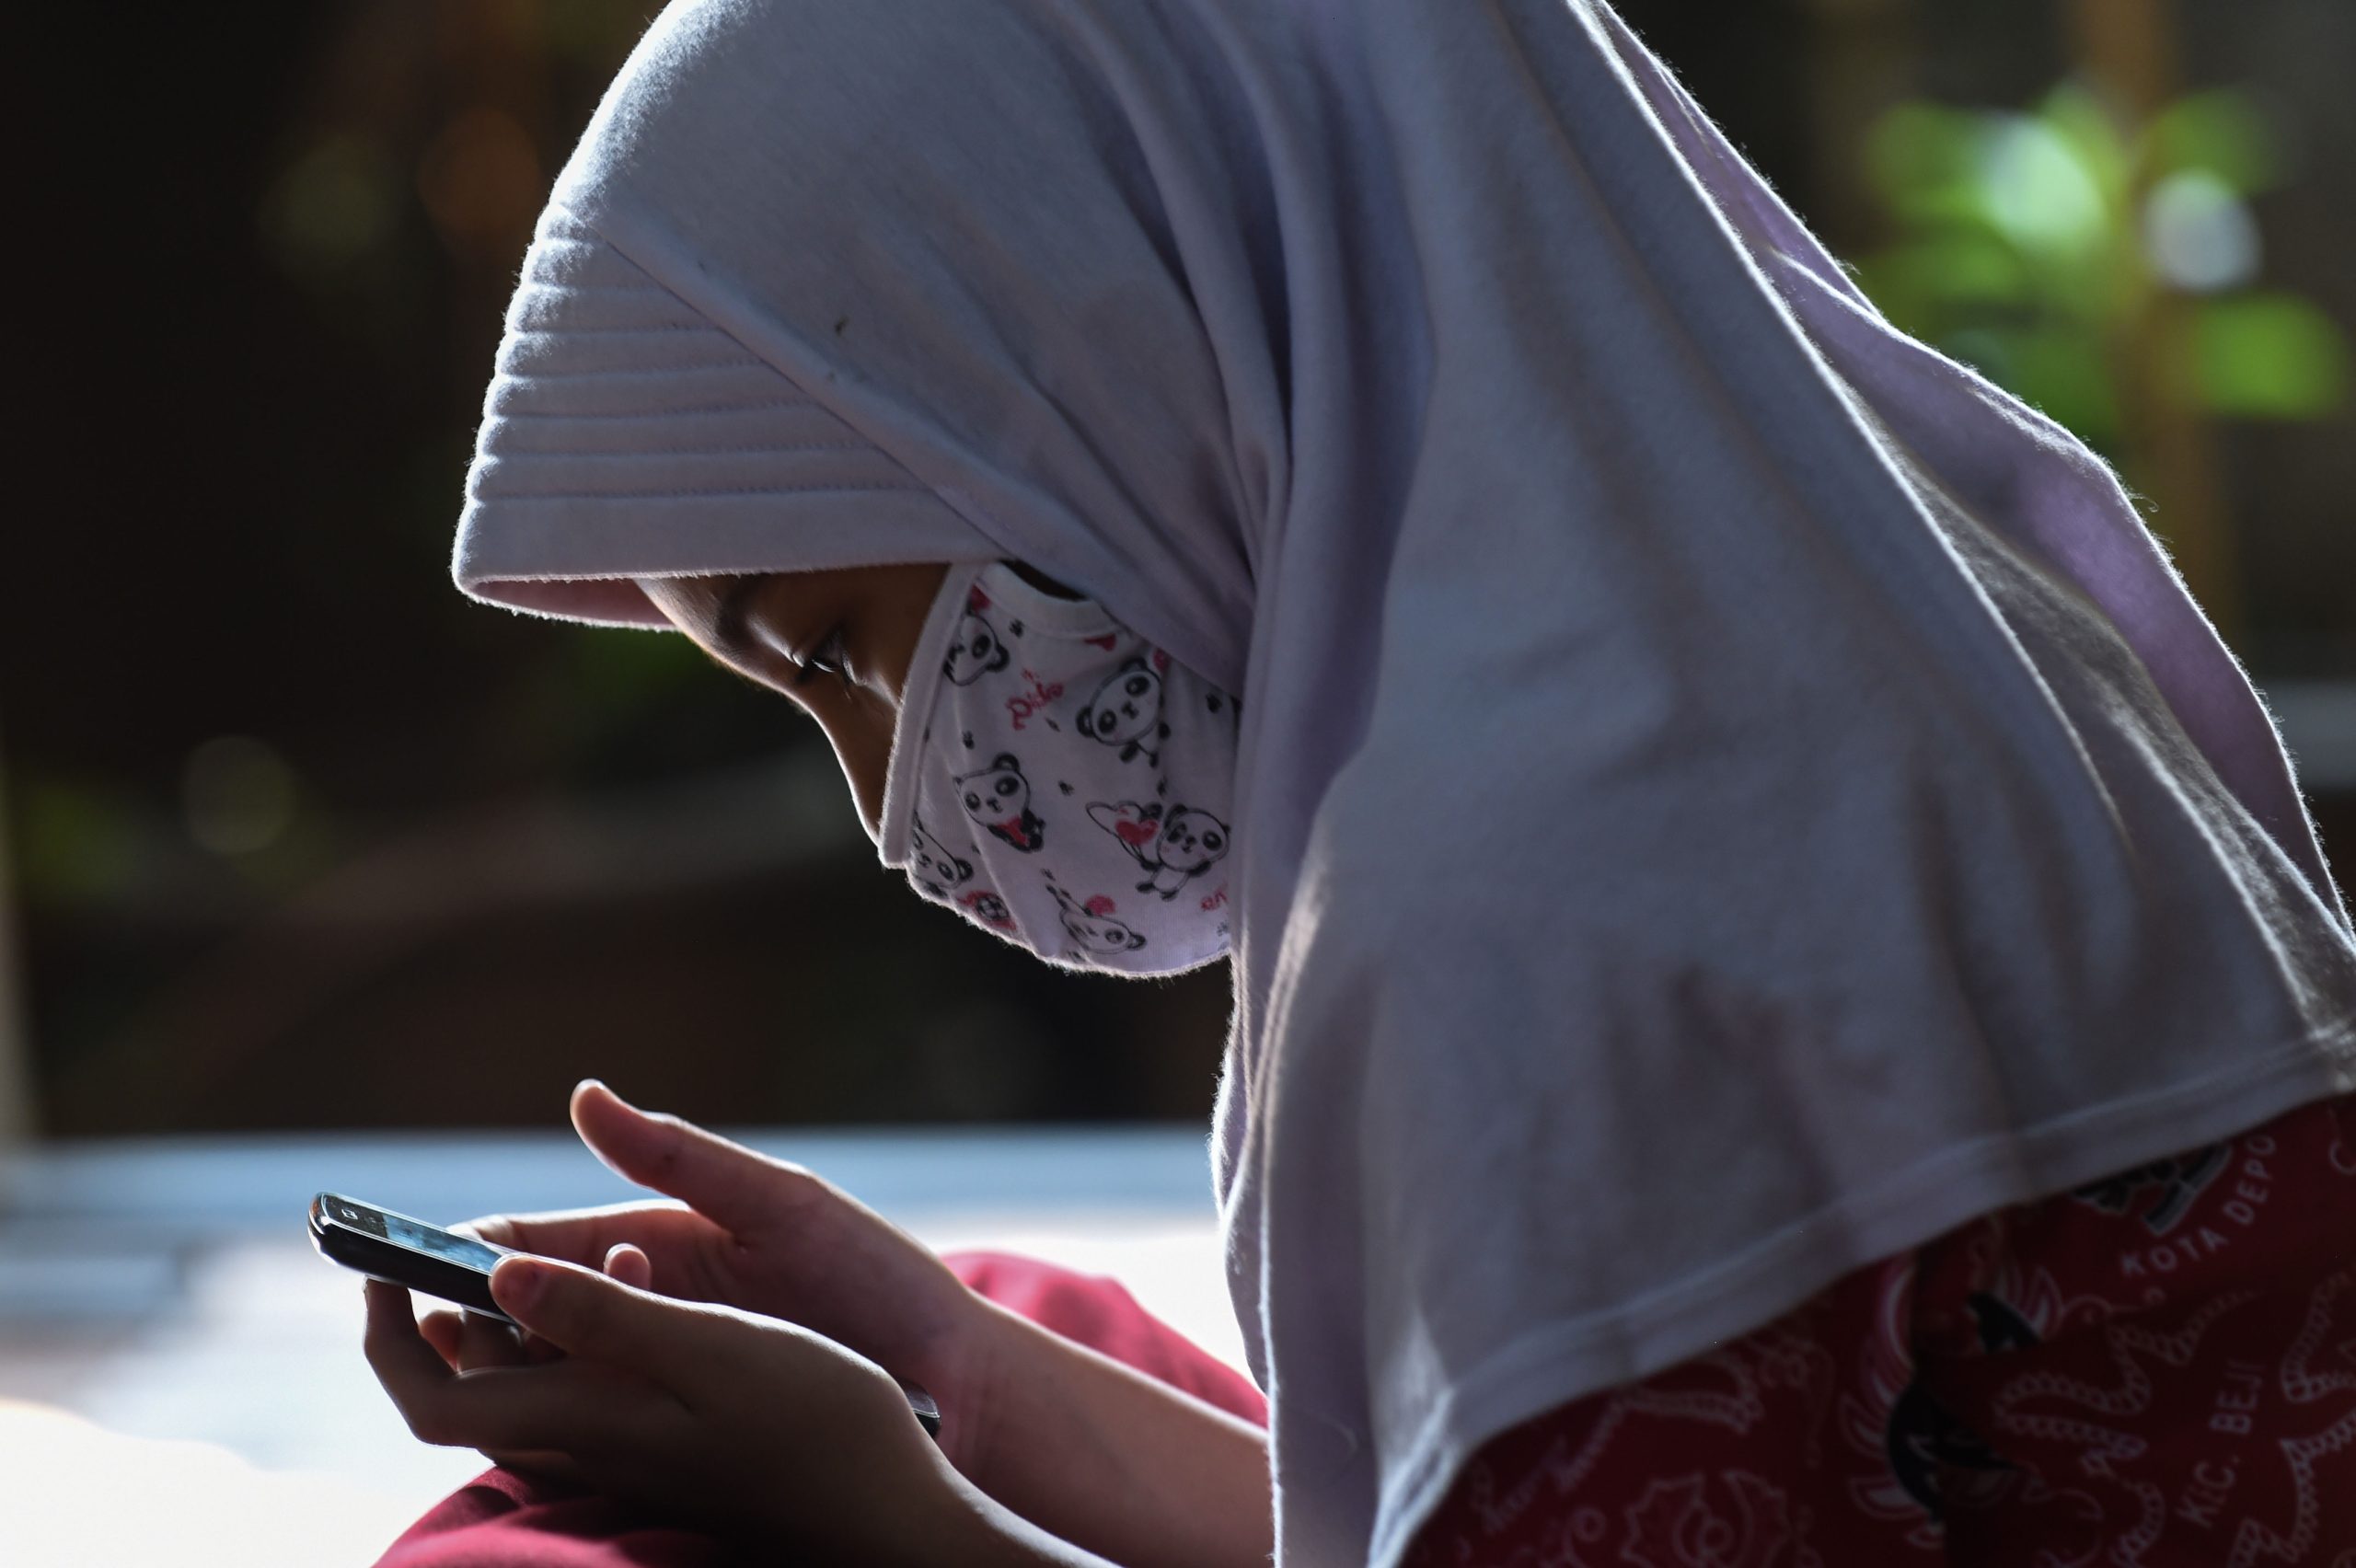 Muslim Jakarta Girls Porn - Indonesia will enforce laws on content moderation with tight response time  and harsh fines, documents show - Rest of World